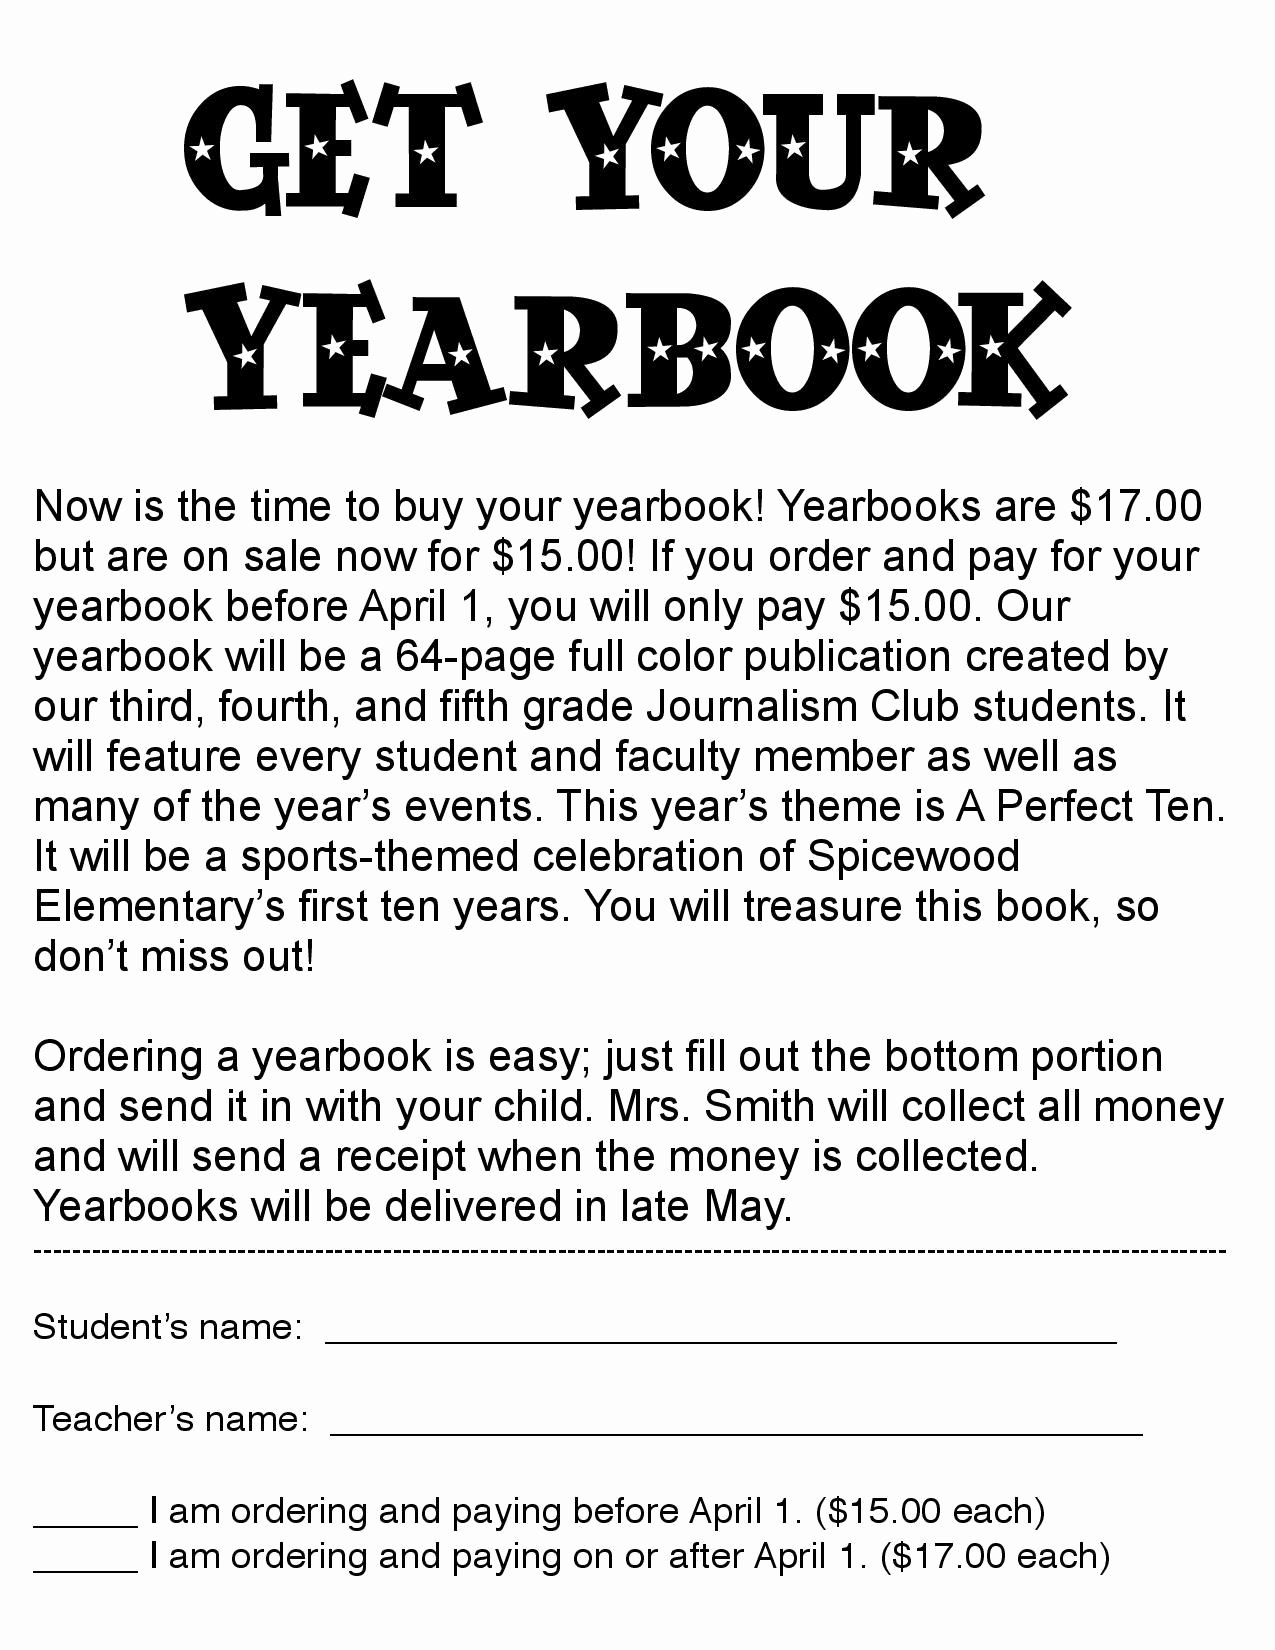 Yearbook order form Template Elegant Pin by Caterina Dingas On Yearbook Classroom